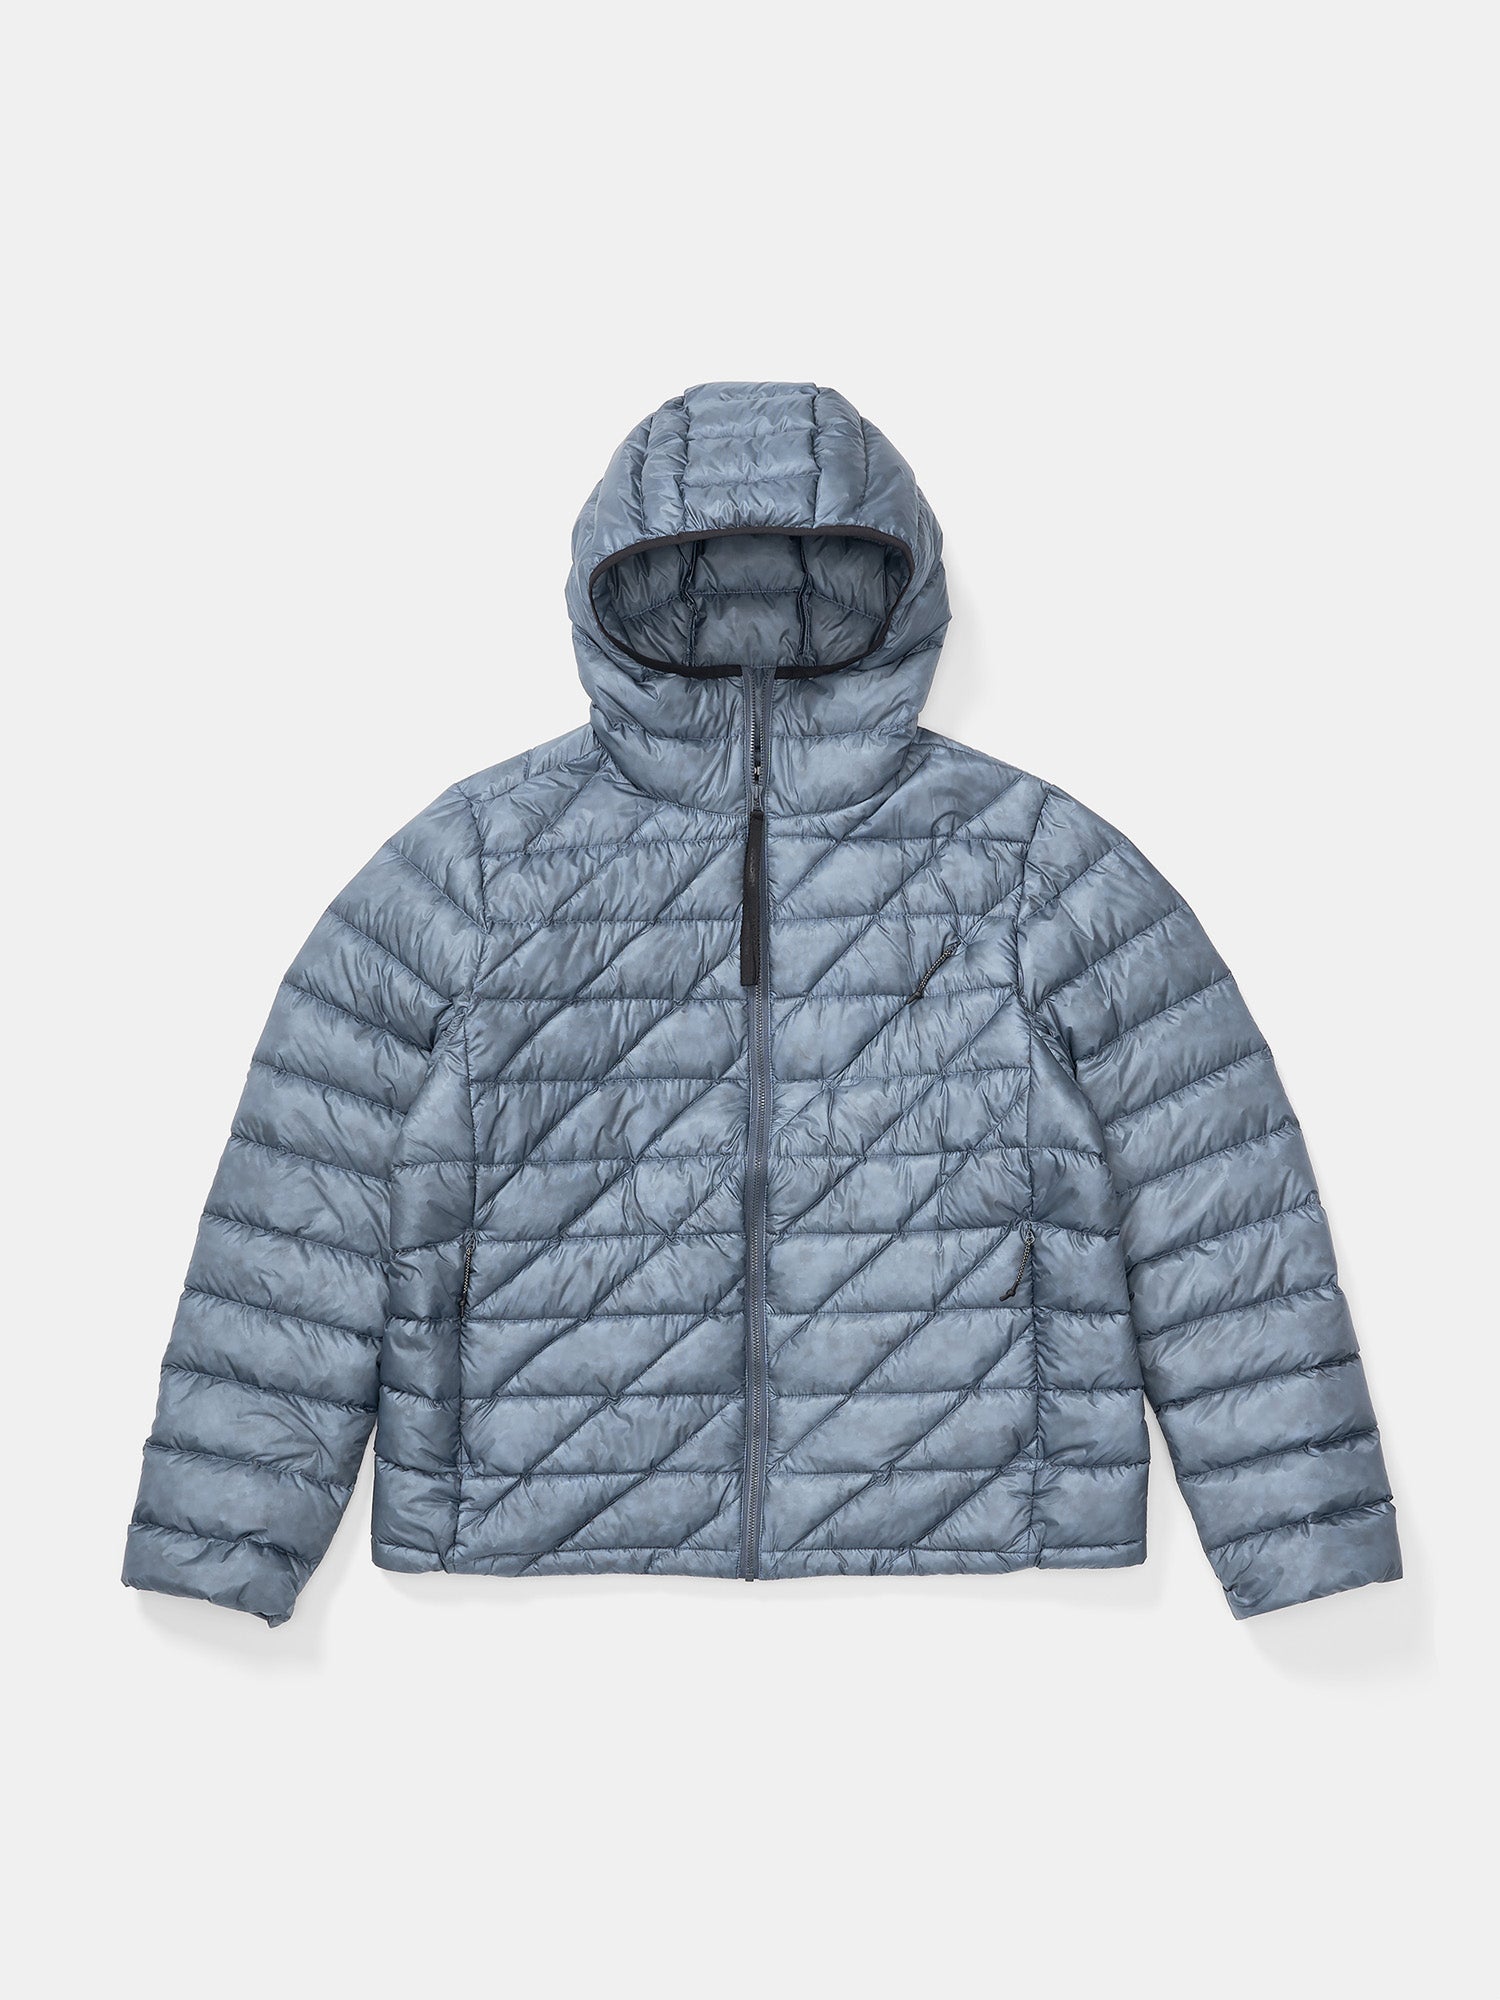 Man Packable Down Jacket - China Blue - flat lay - front